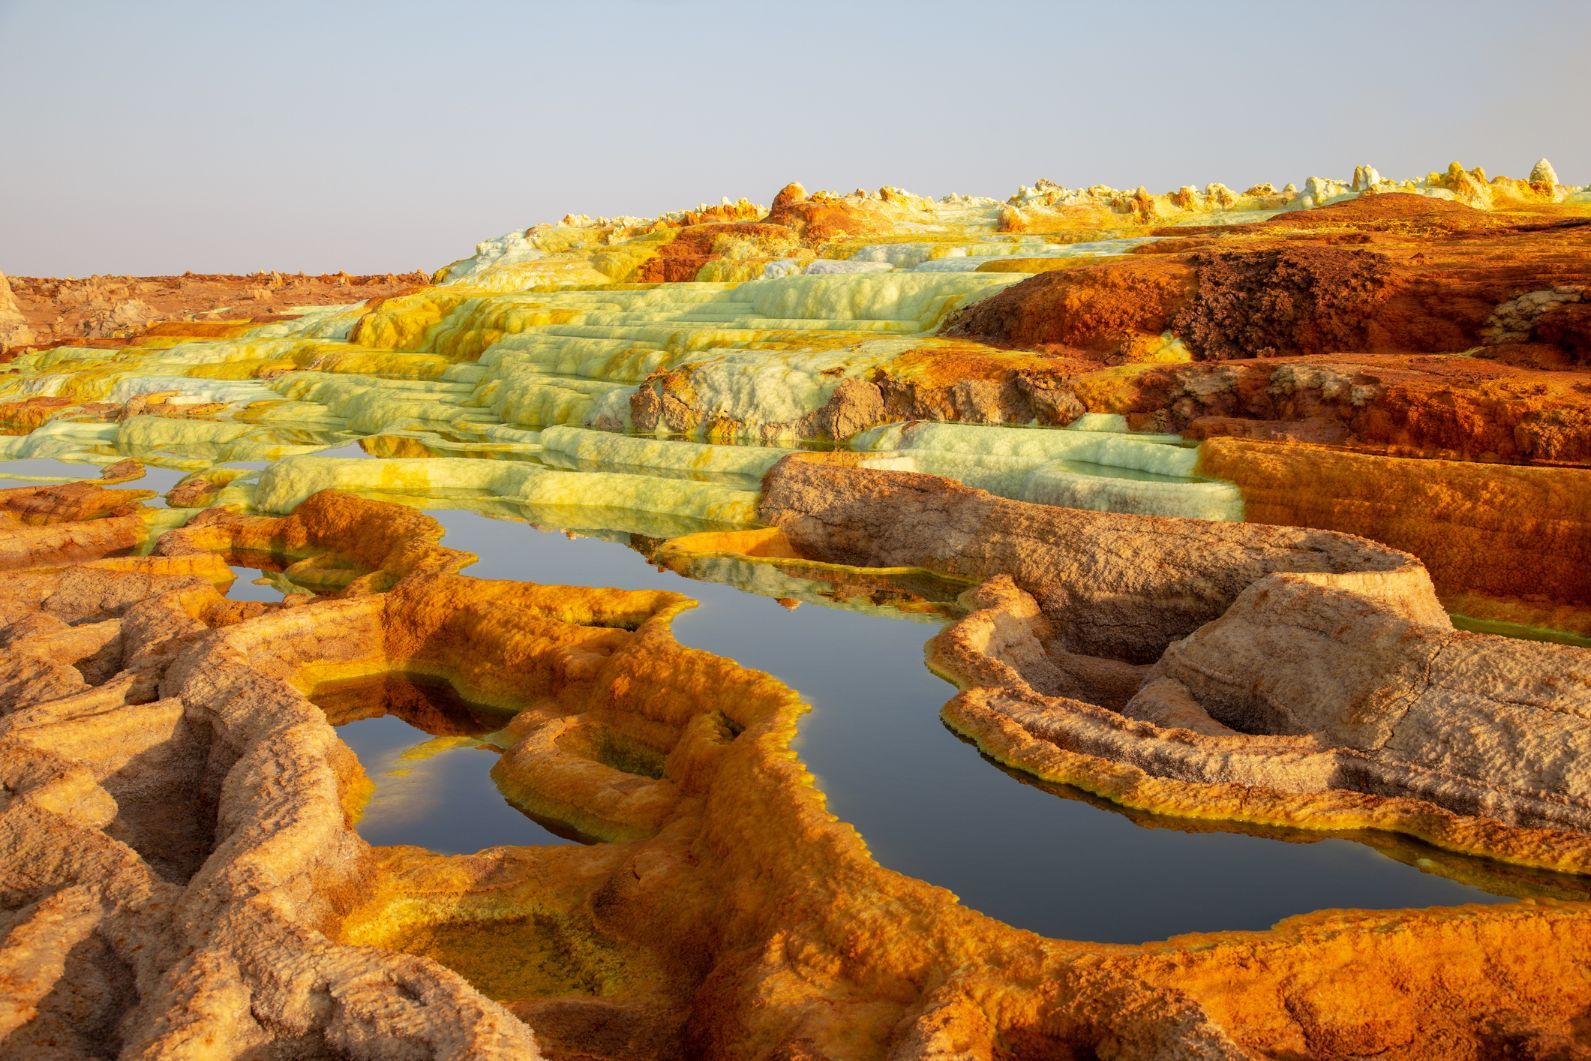 The remarkable Danakil Depression in Ethiopia, truly one of the most beautiful landscapes in the world. Photo: Getty